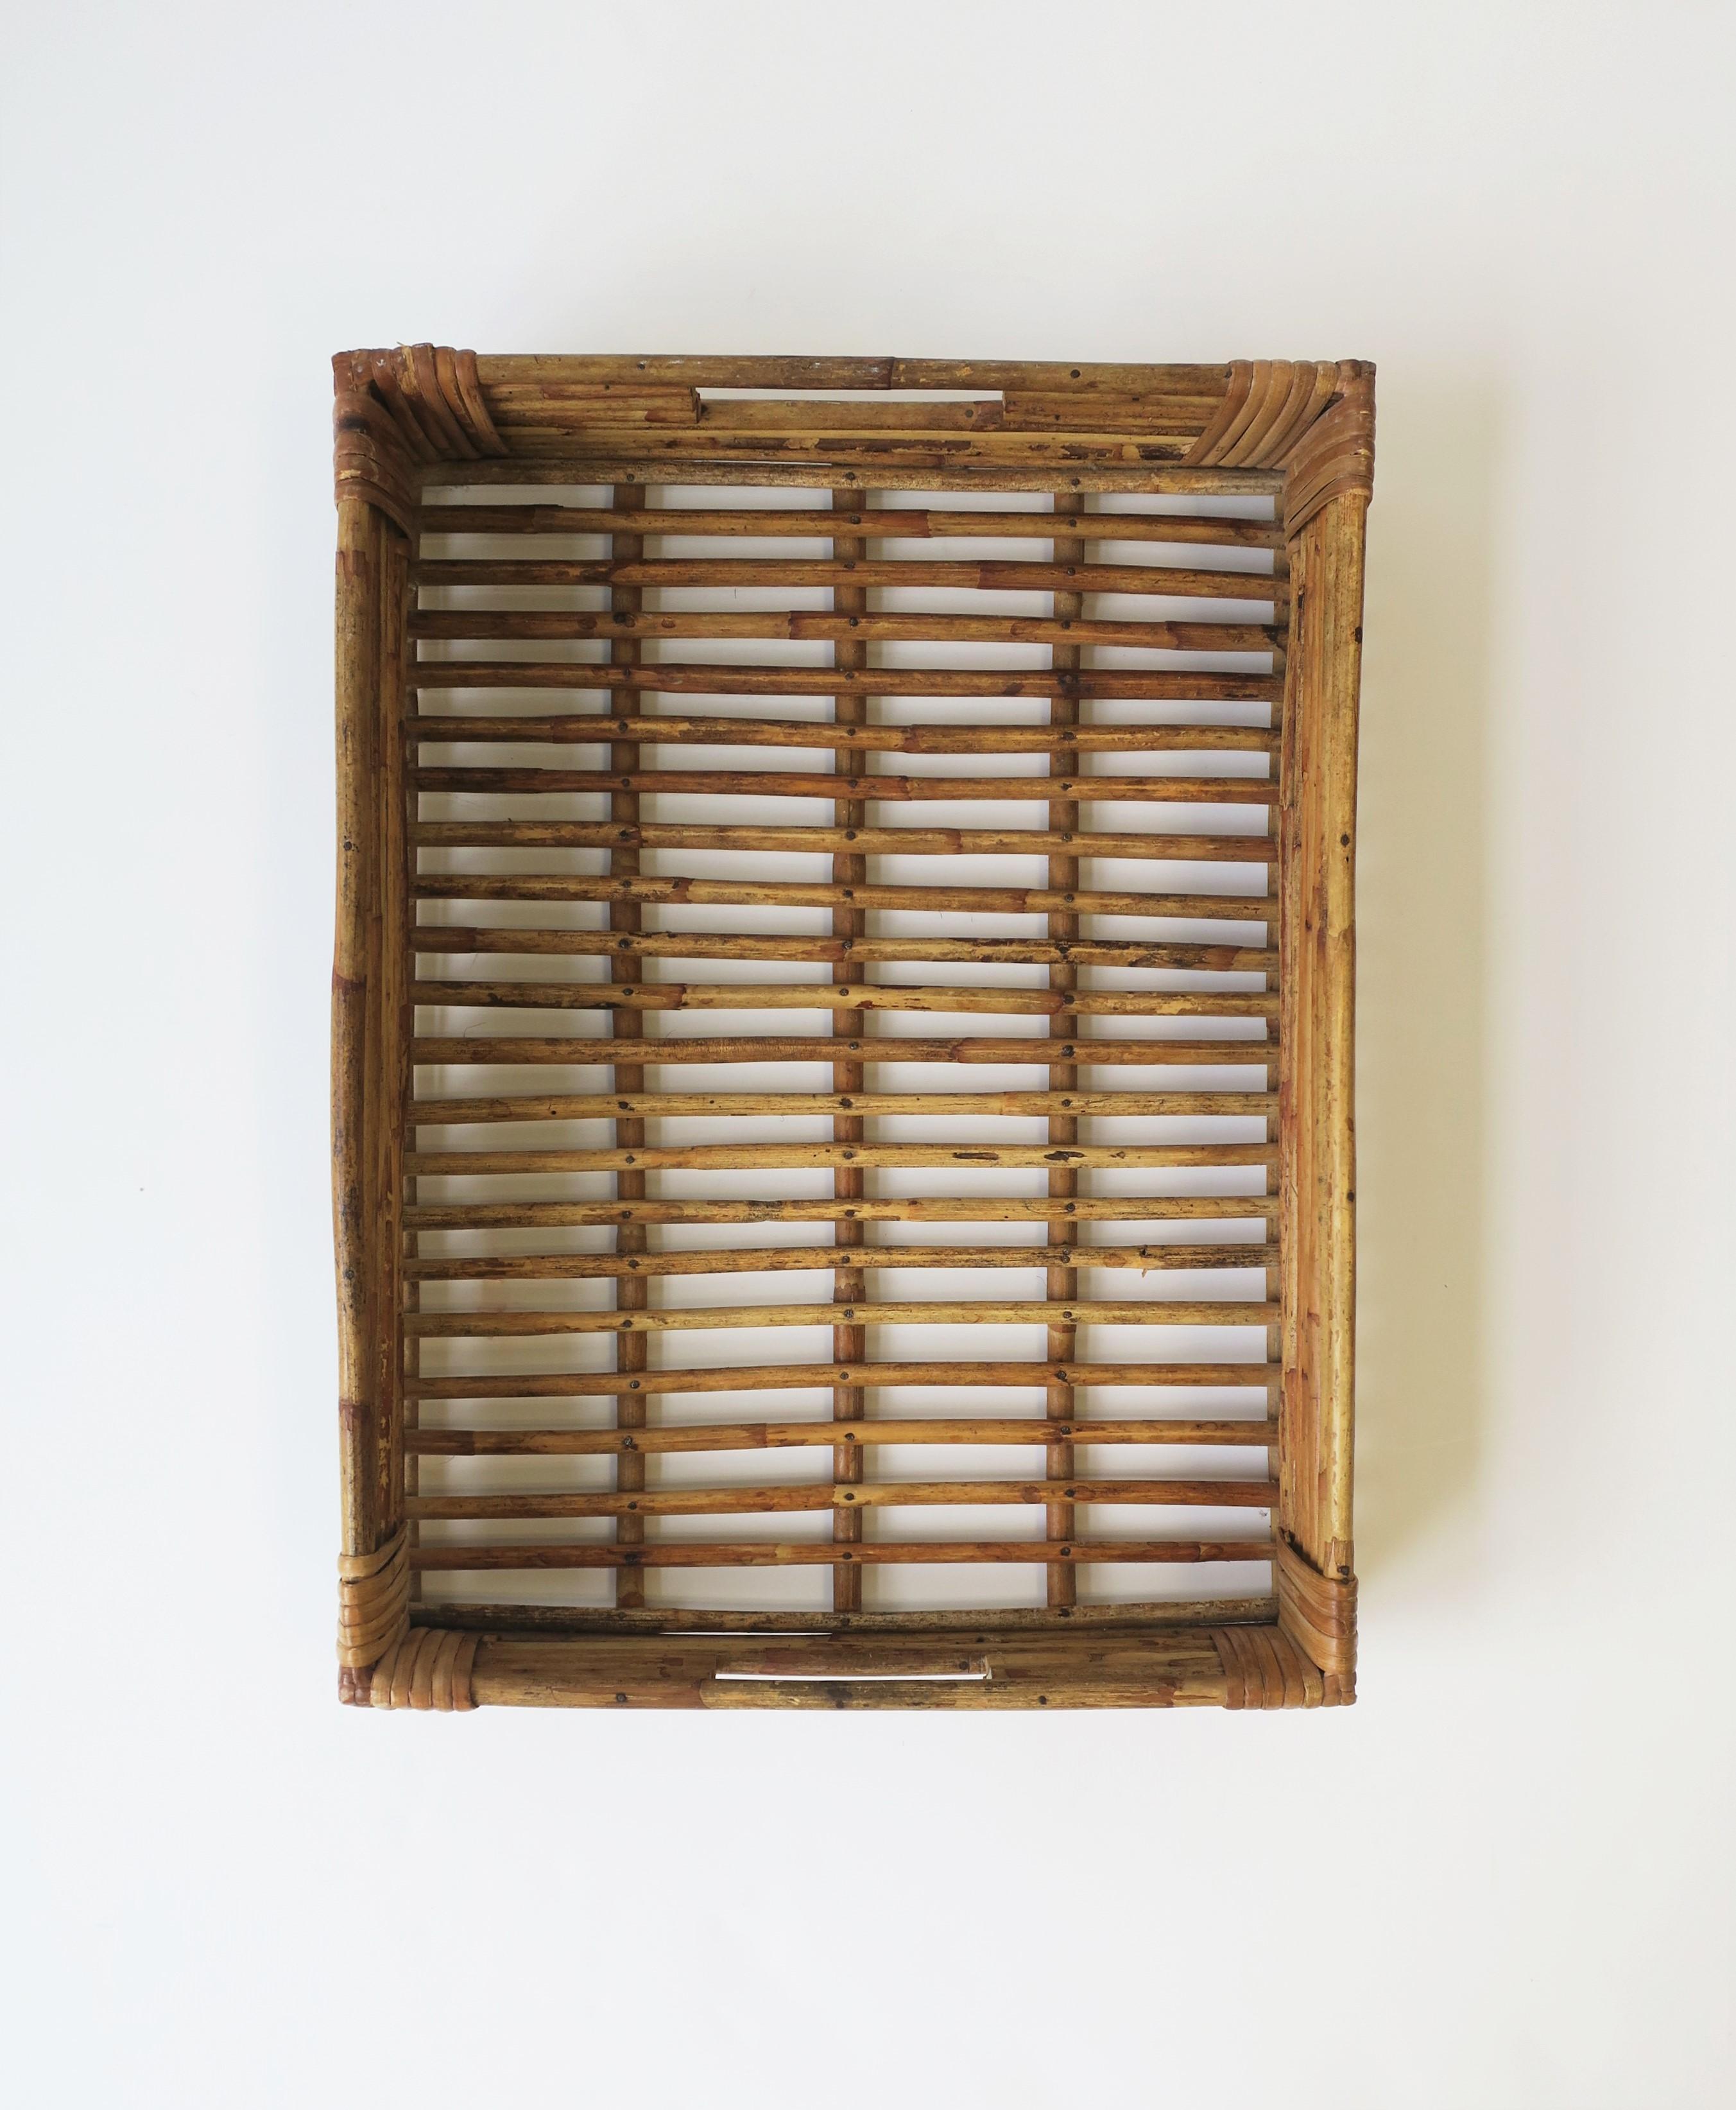 A wicker reed tray or desk letter storage box, circa late-20th century. A great serving tray with cut out handles and wrapped corners, or, to hold magazines, loose papers, mail, office/desk stuff, etc. Dimensions: 3.25